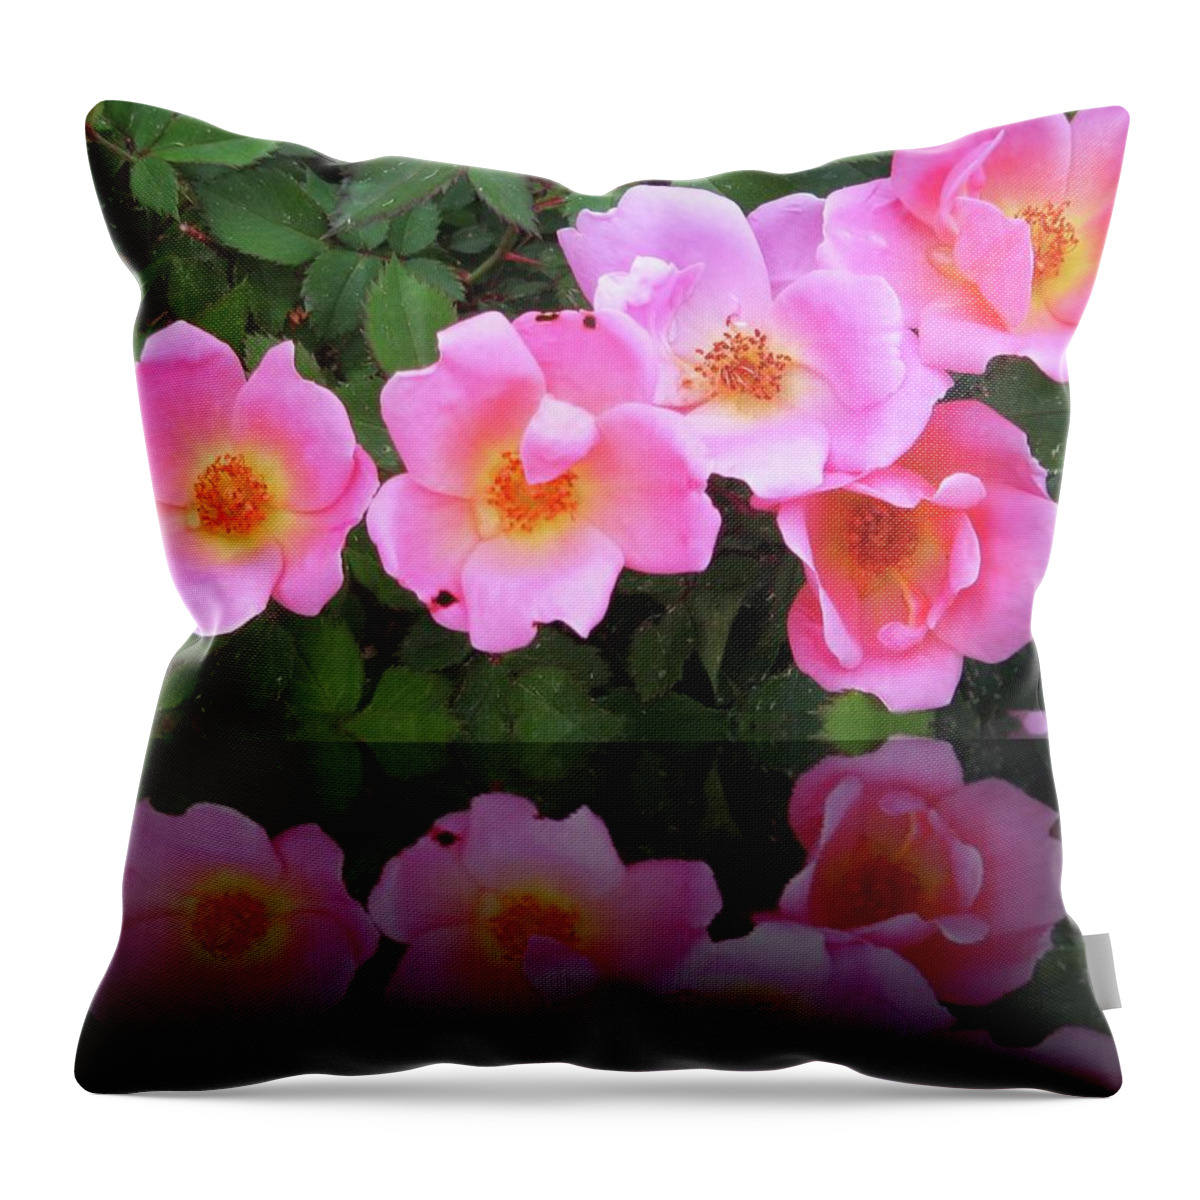 Roses Throw Pillow featuring the photograph Pink Roses by Cynthia Westbrook